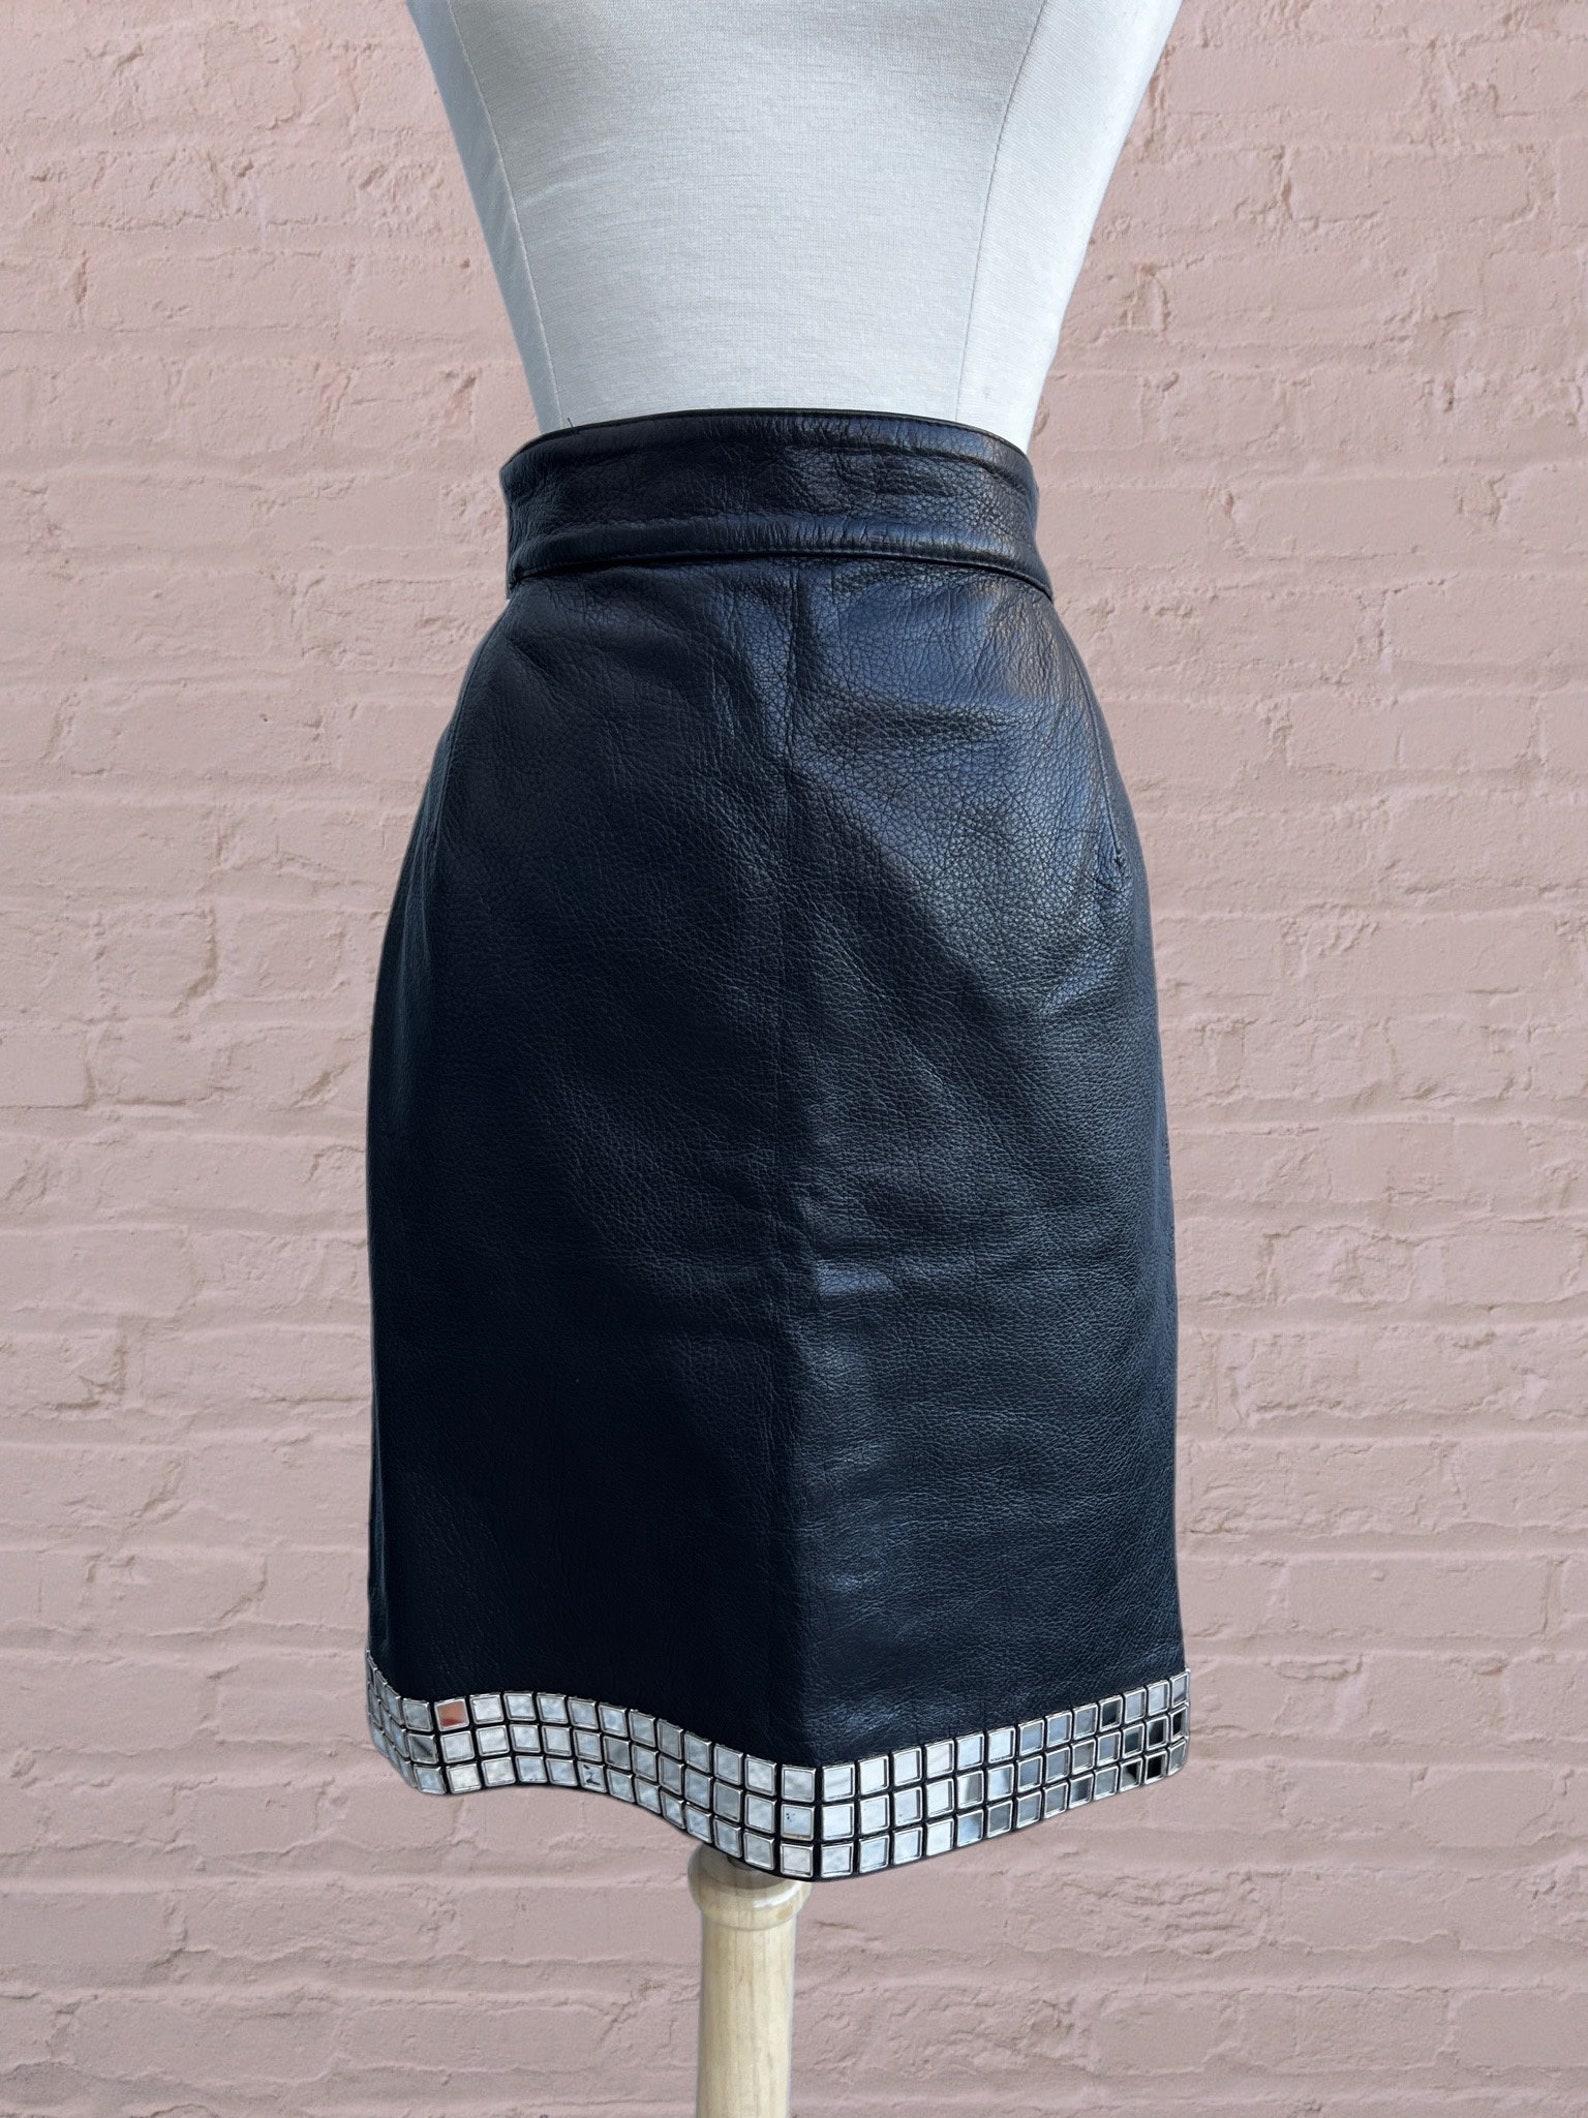 Moschino pebbled leather skirt. 
High waist. Pencil silhouette. 
Small mirror tiles around the hem. 
Back zip closure with snap button at waist.

✩ This skirt is an amazing and rare find!

Circa Spring/Summer 1990
Moschino 
Made in Italy
100%